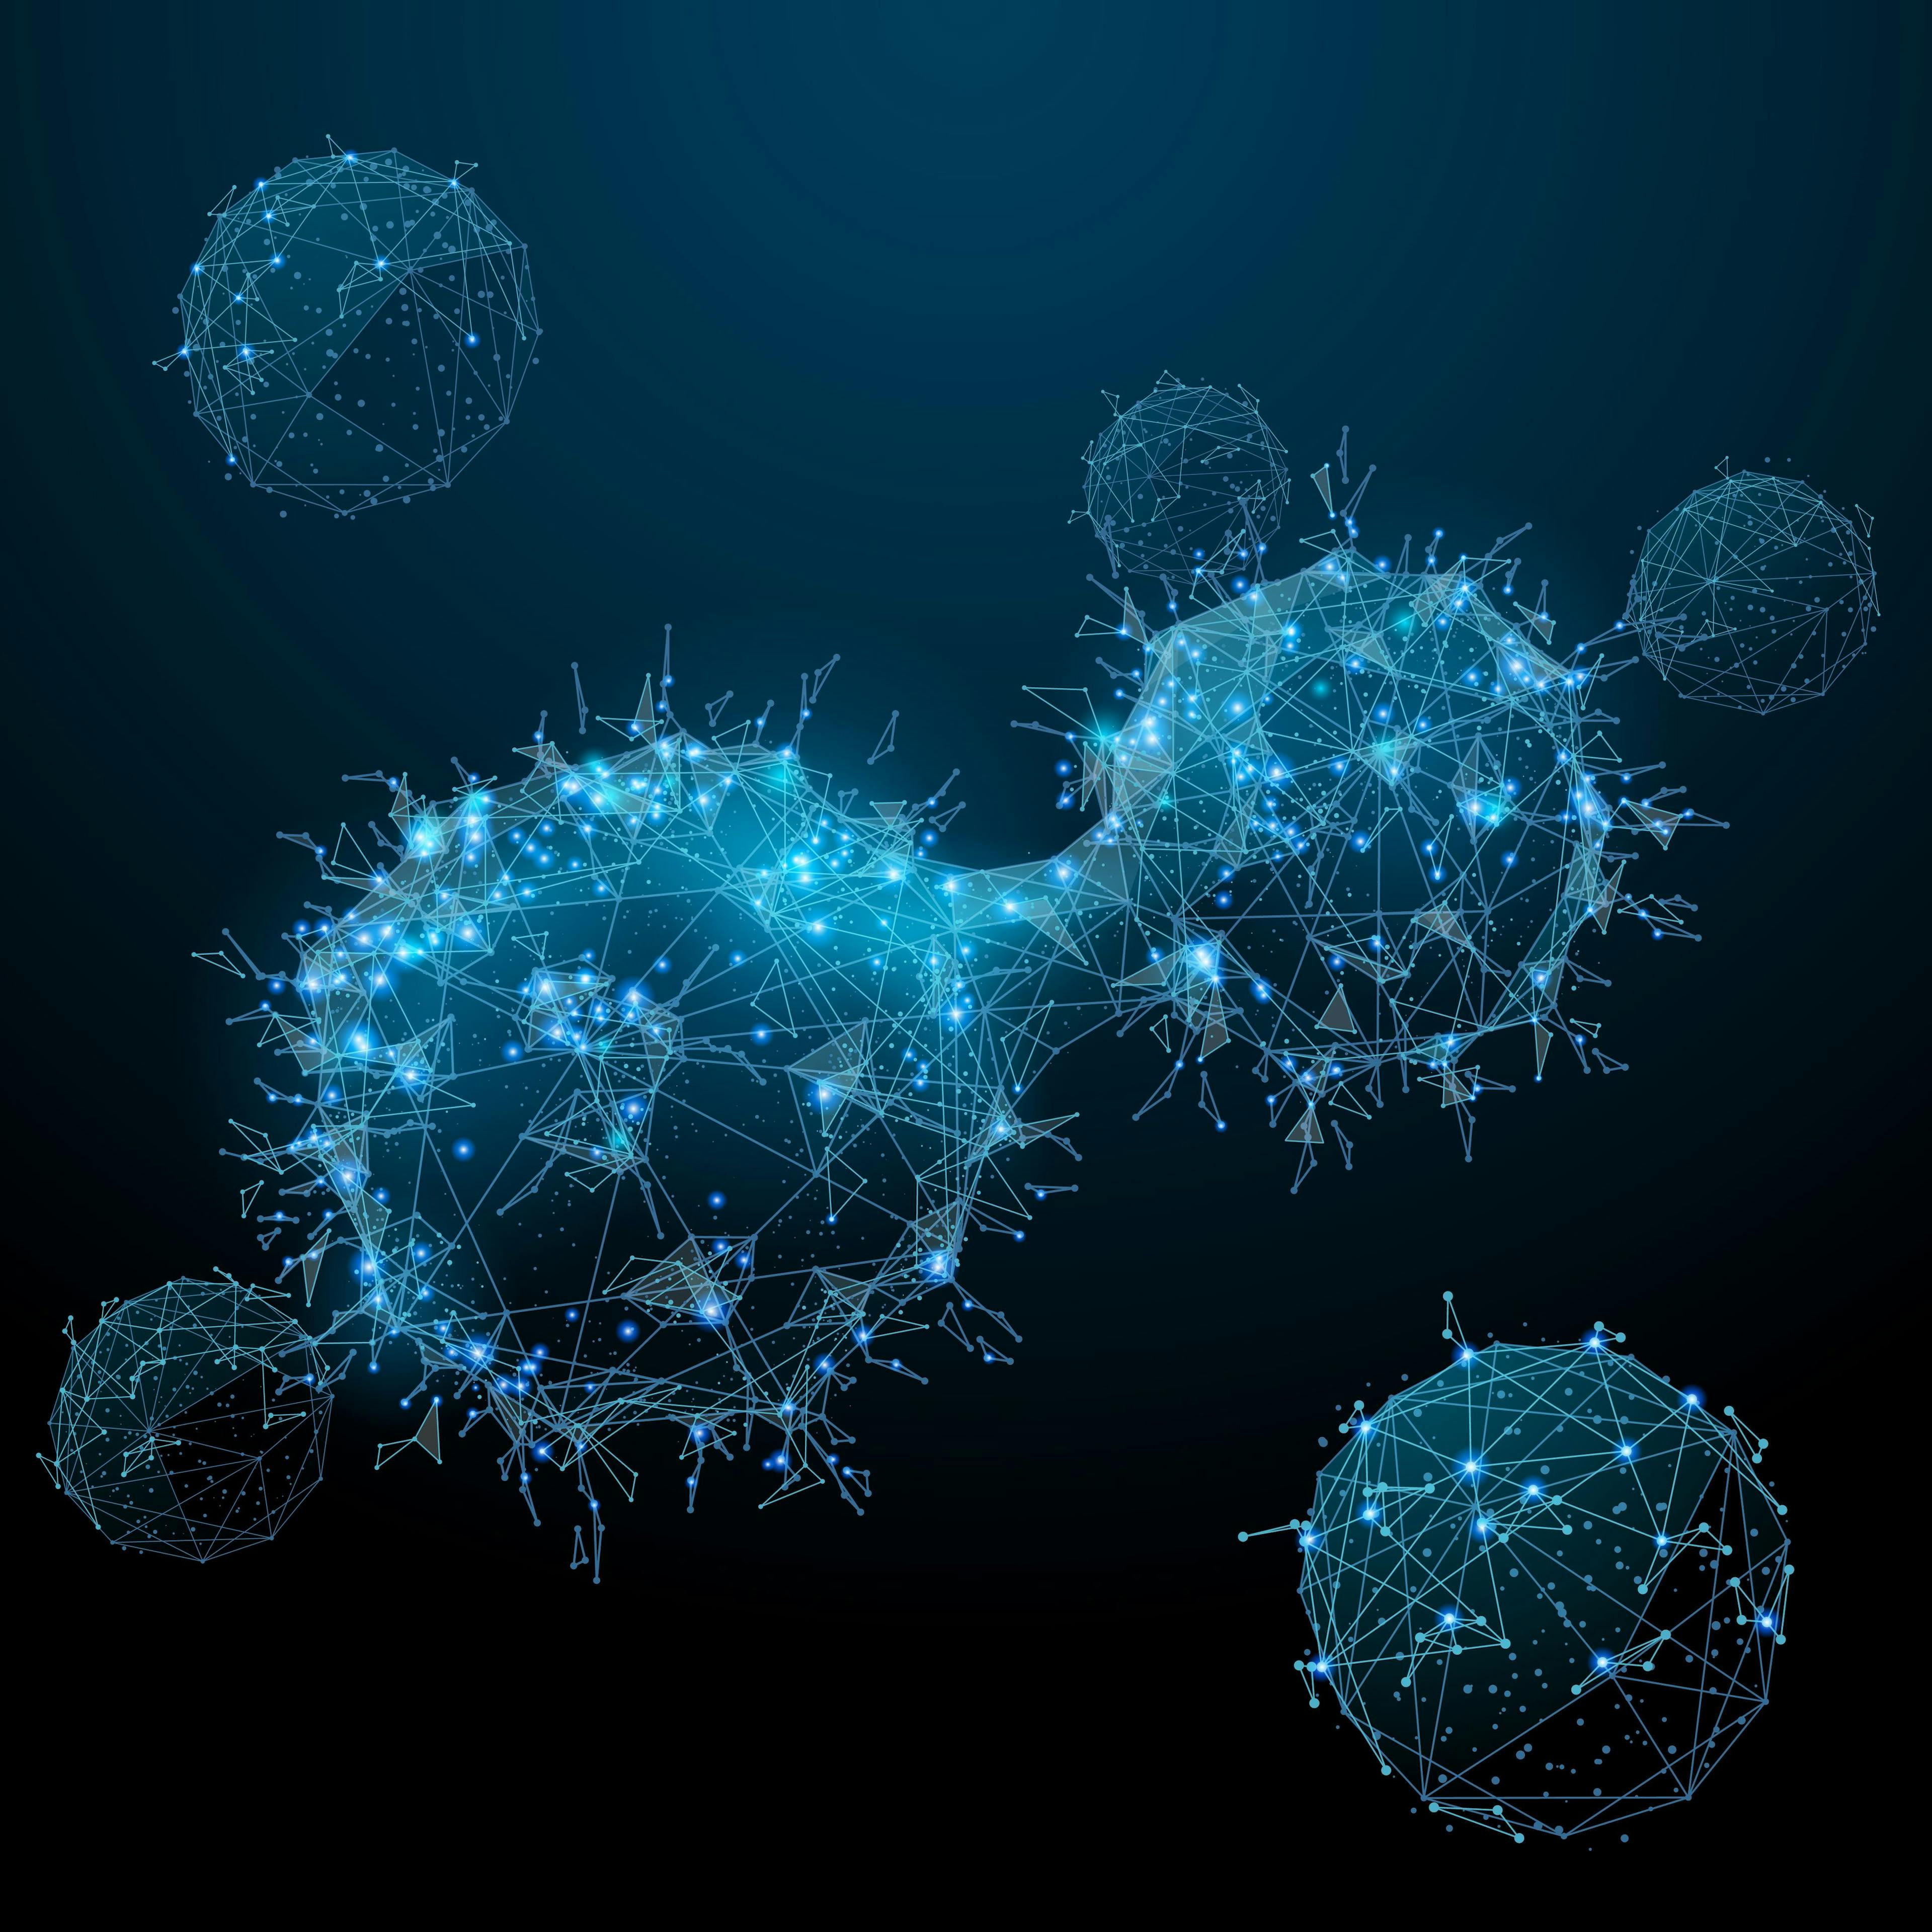 Cancer cells. Oncology low poly wireframe. | Image Credit: anttoniart - stock.adobe.com